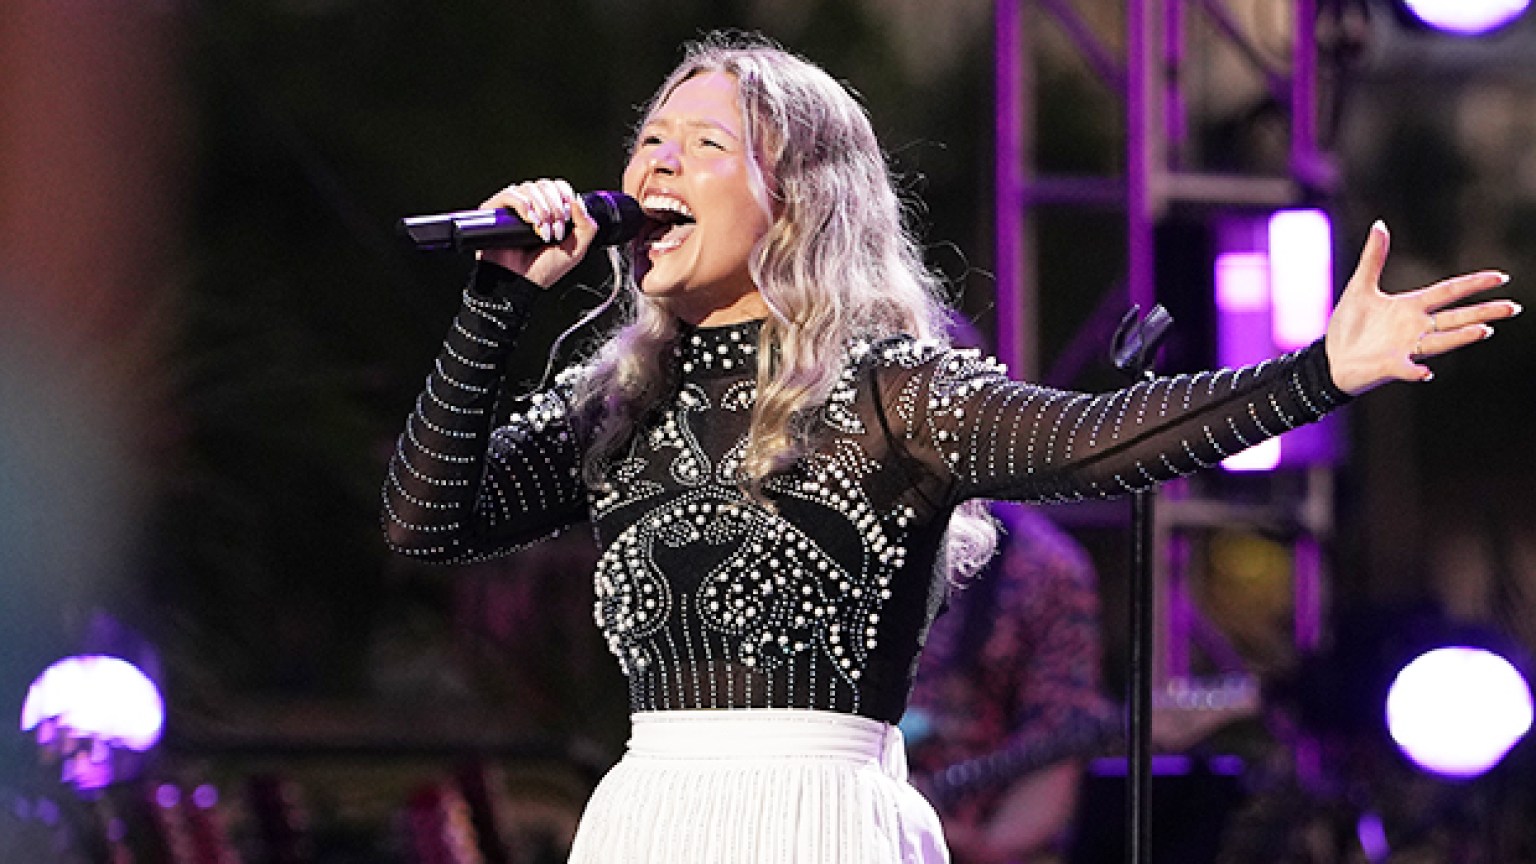 Who Is Marybeth Byrd? Get To Know The ‘American Idol’ Country Singer